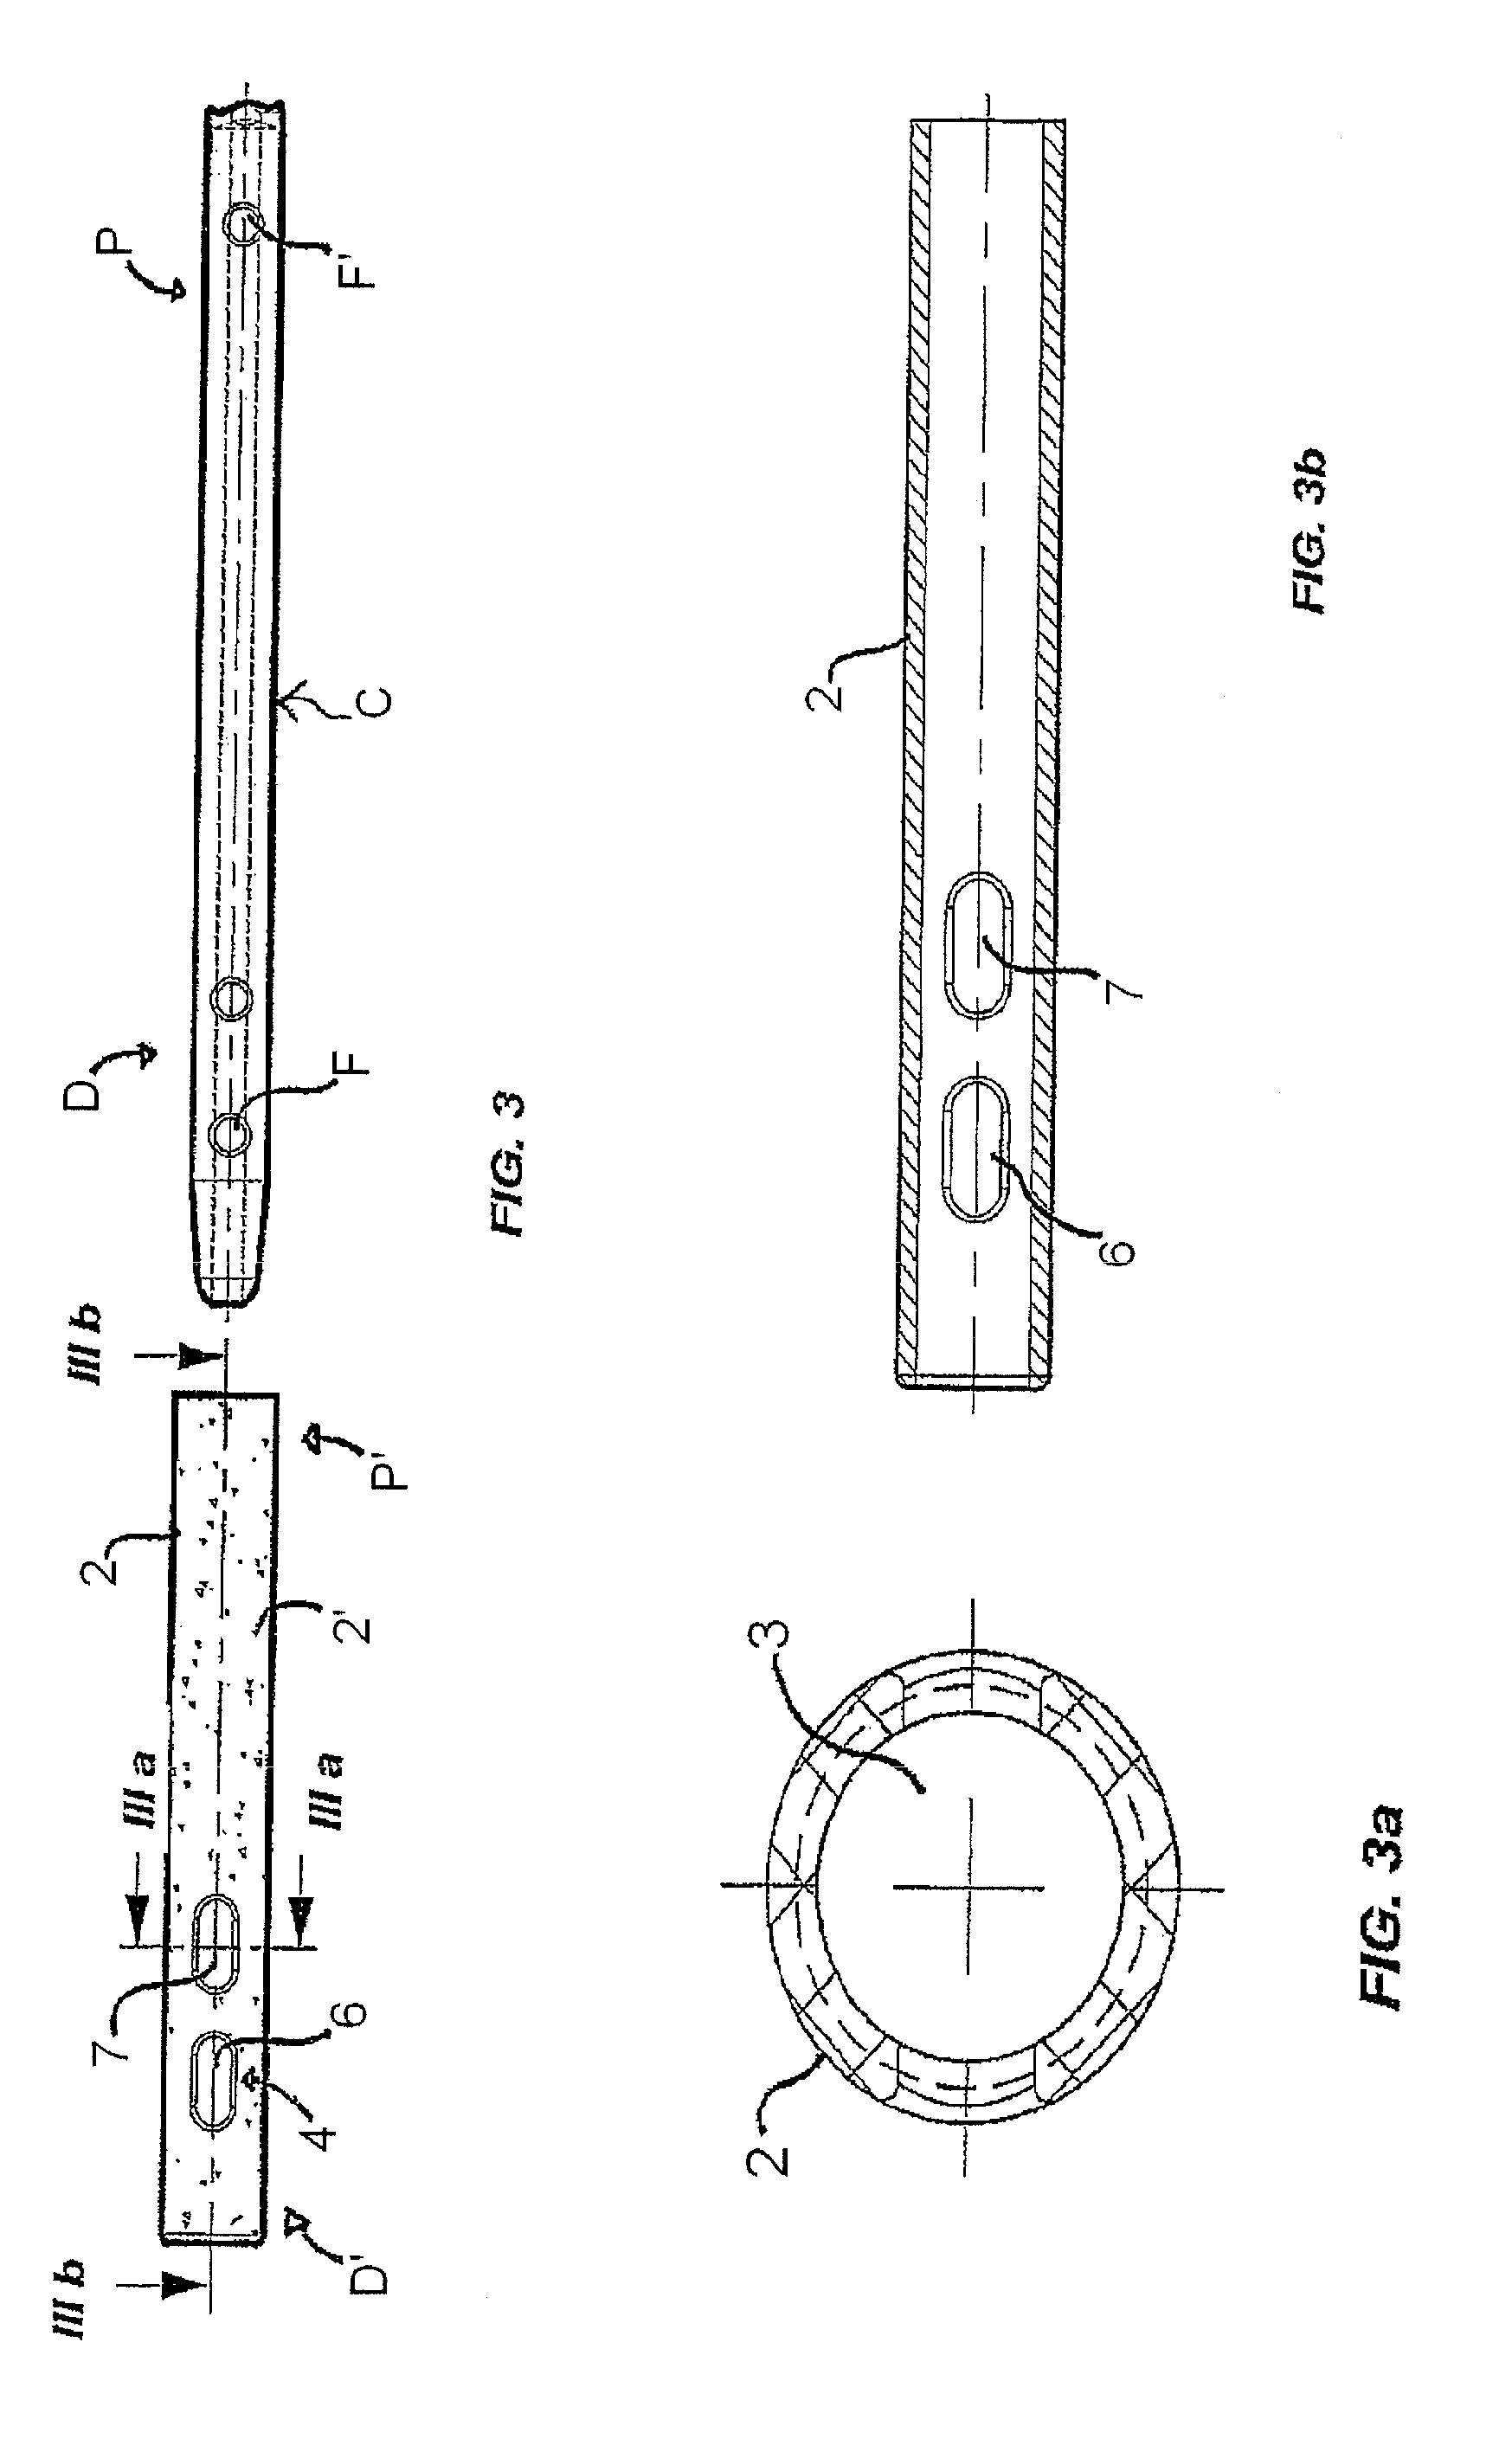 Disposable device for treatment of infections of human limbs